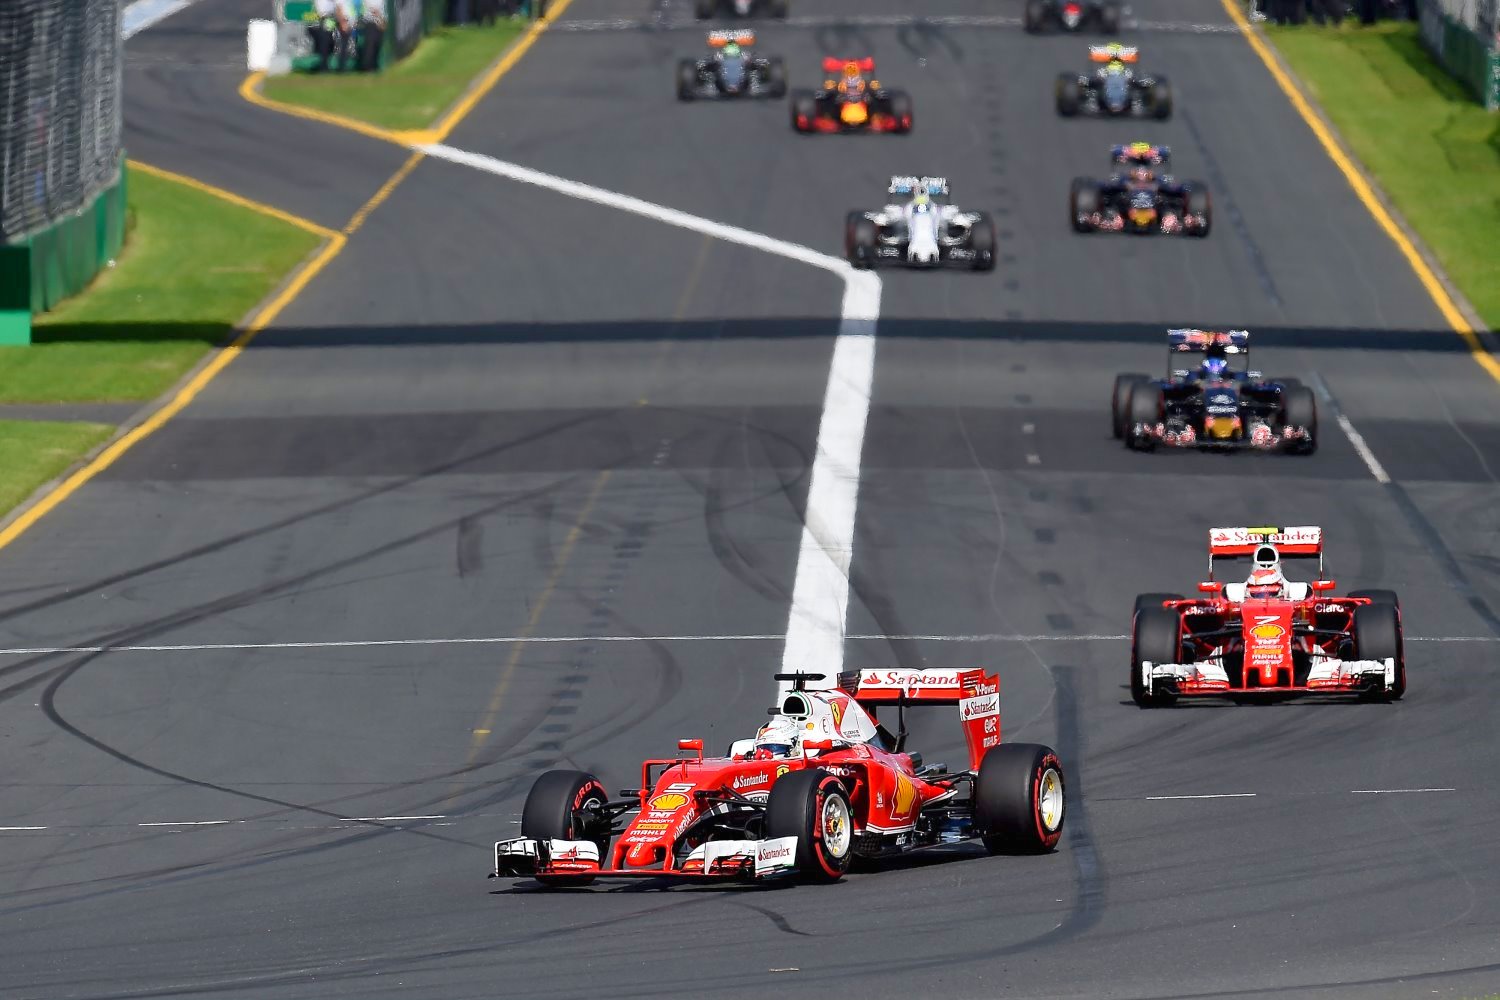 Vettel and Raikkonen run 1-2 in Australia. Vettel was not allowed to be told why Kimi dropped out of race